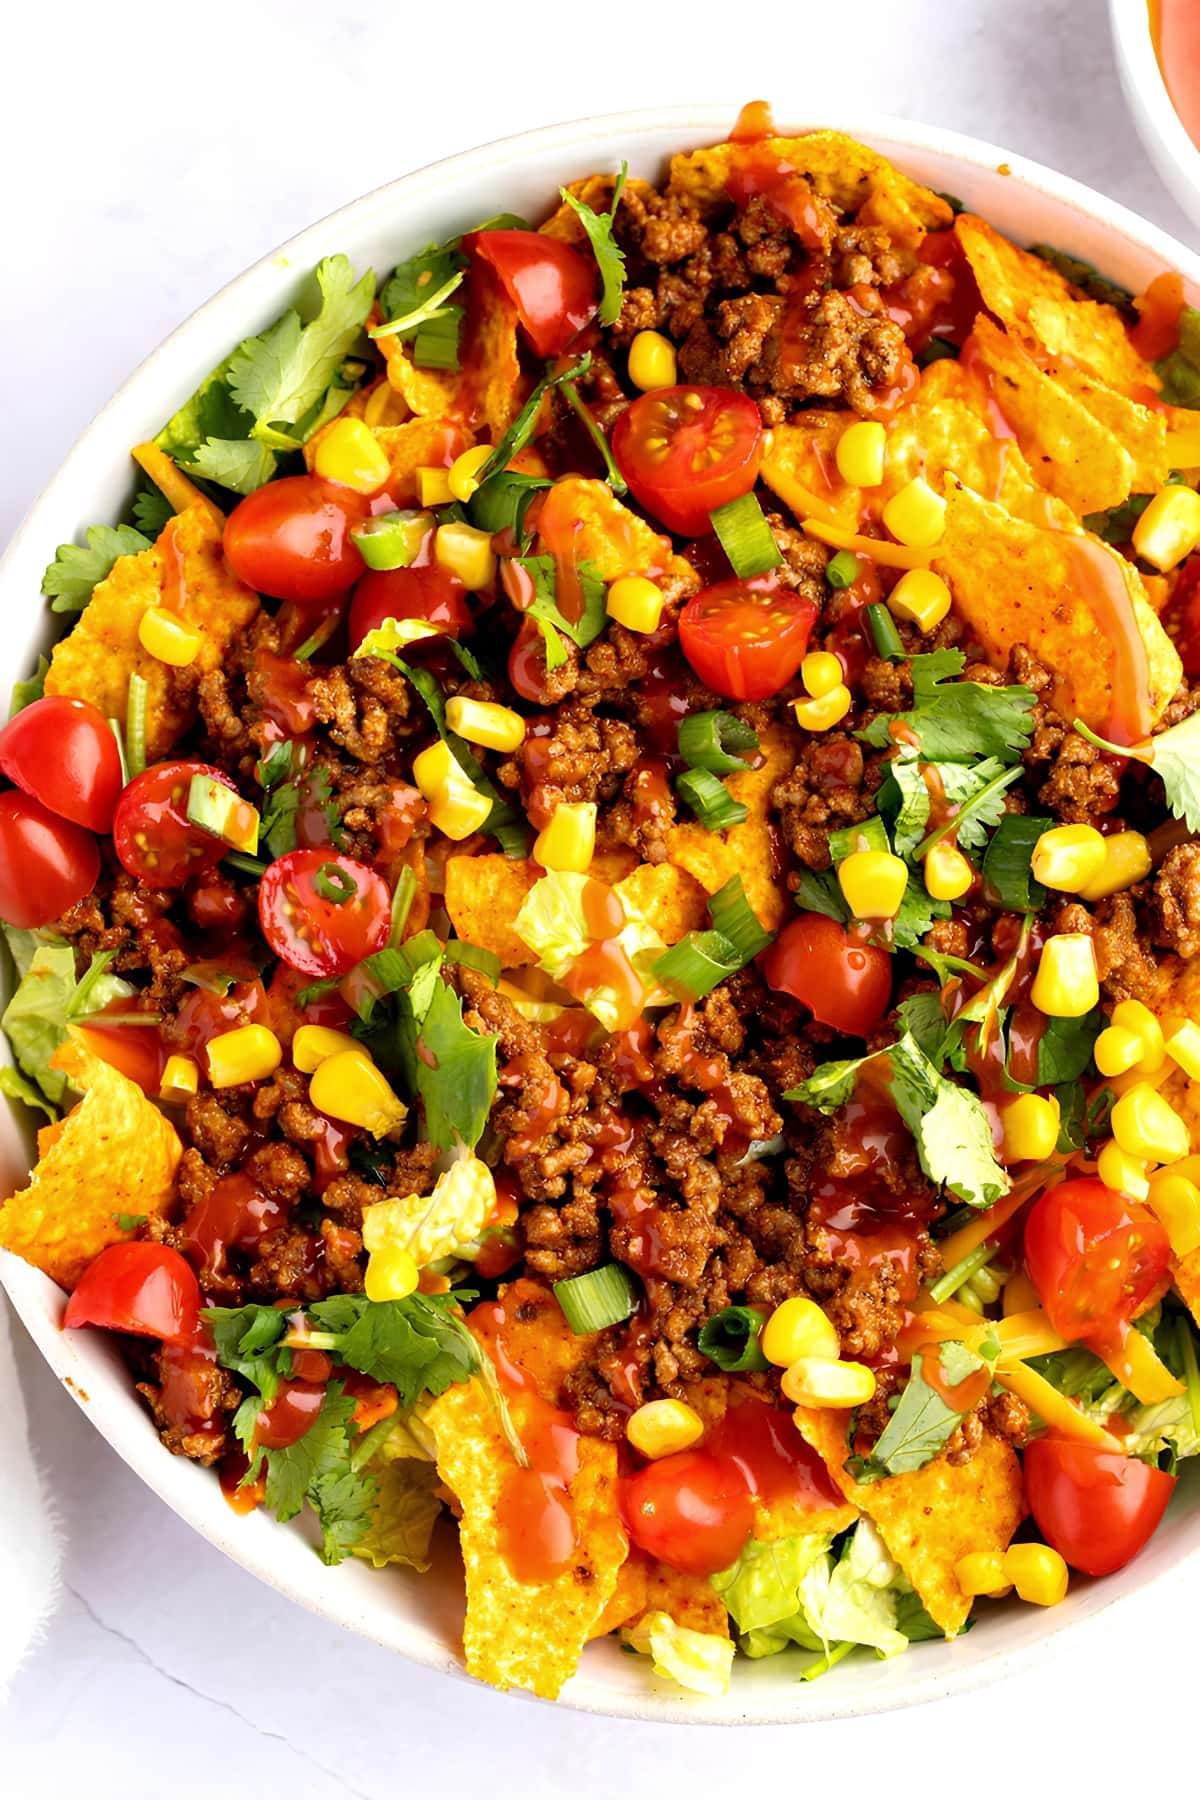 Top view of a bowl of Dorito Taco Salad, with beef, tomatoes and corn, bell pepper and greens.